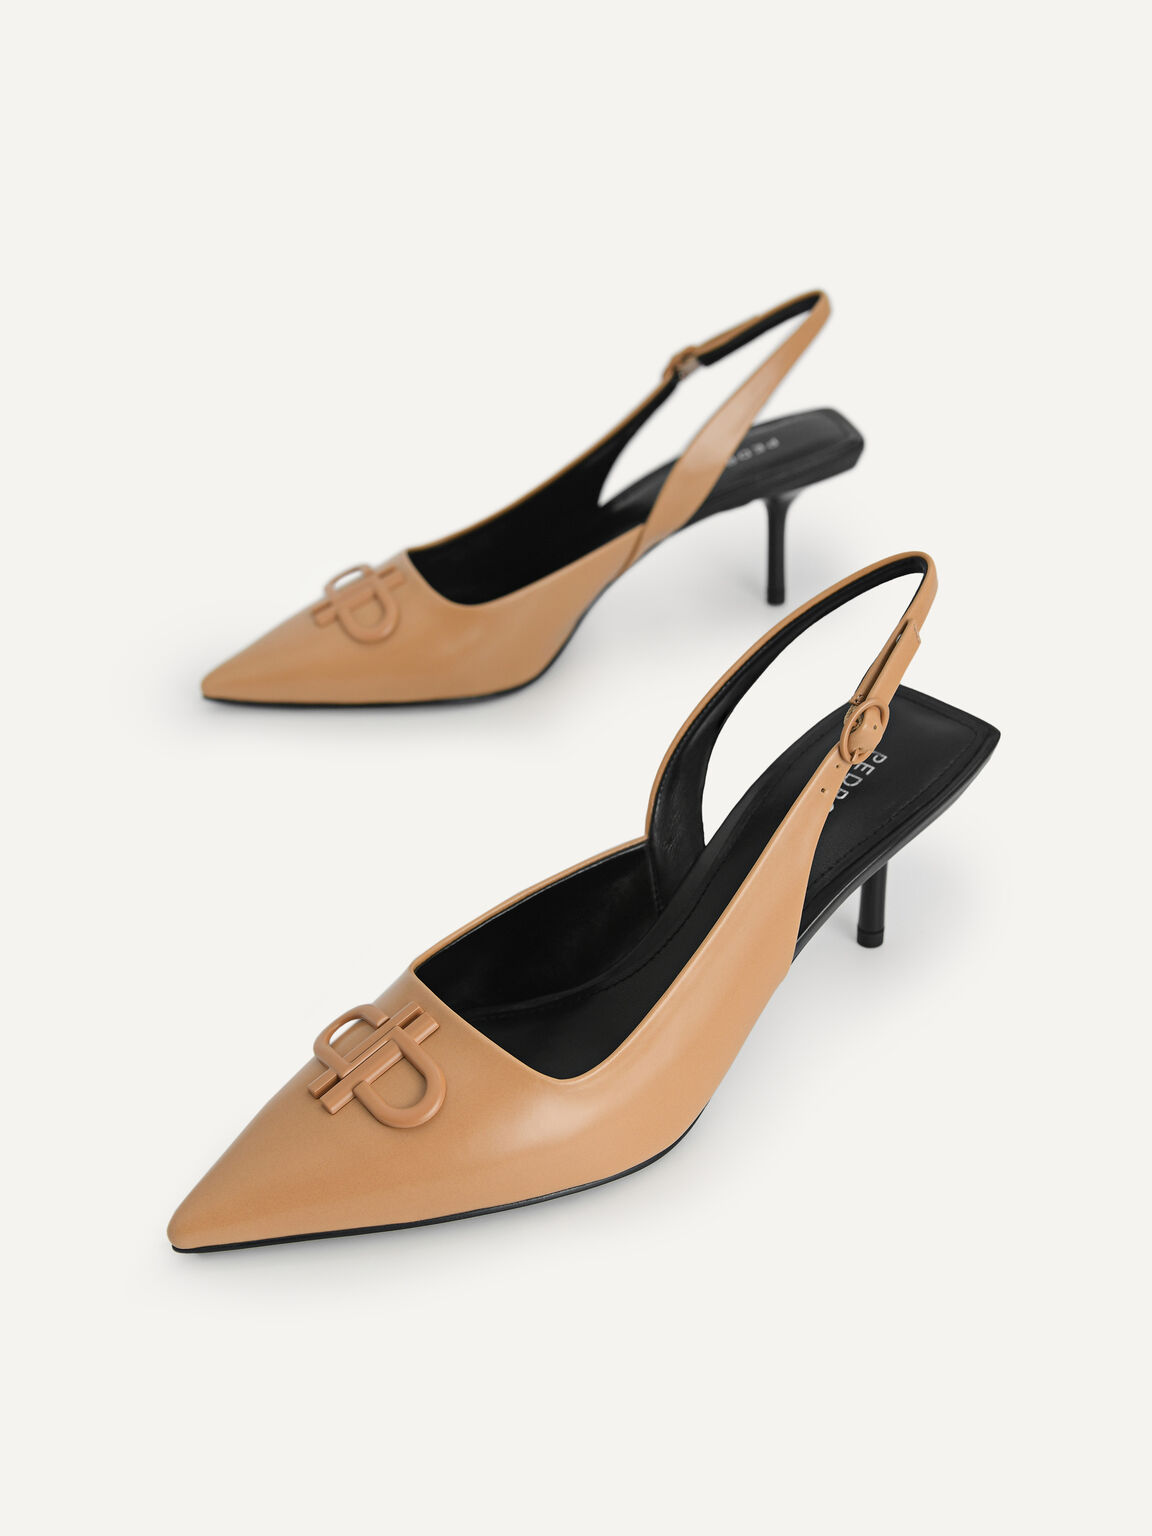 Icon Leather Pointed Toe Slingback Heels, Camel, hi-res